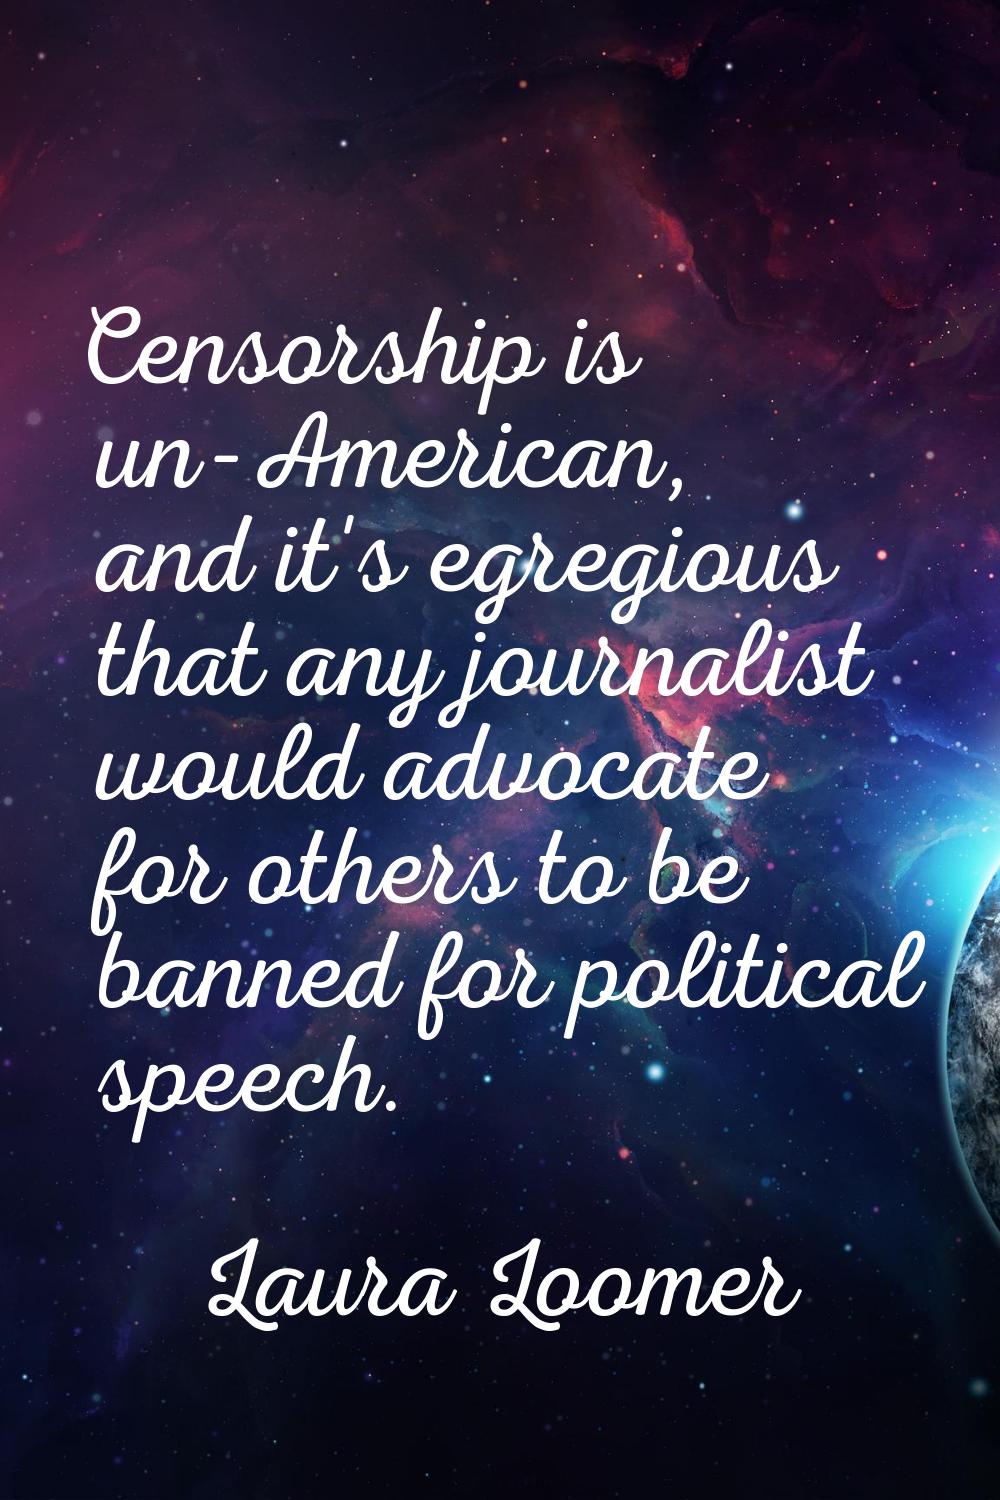 Censorship is un-American, and it's egregious that any journalist would advocate for others to be b